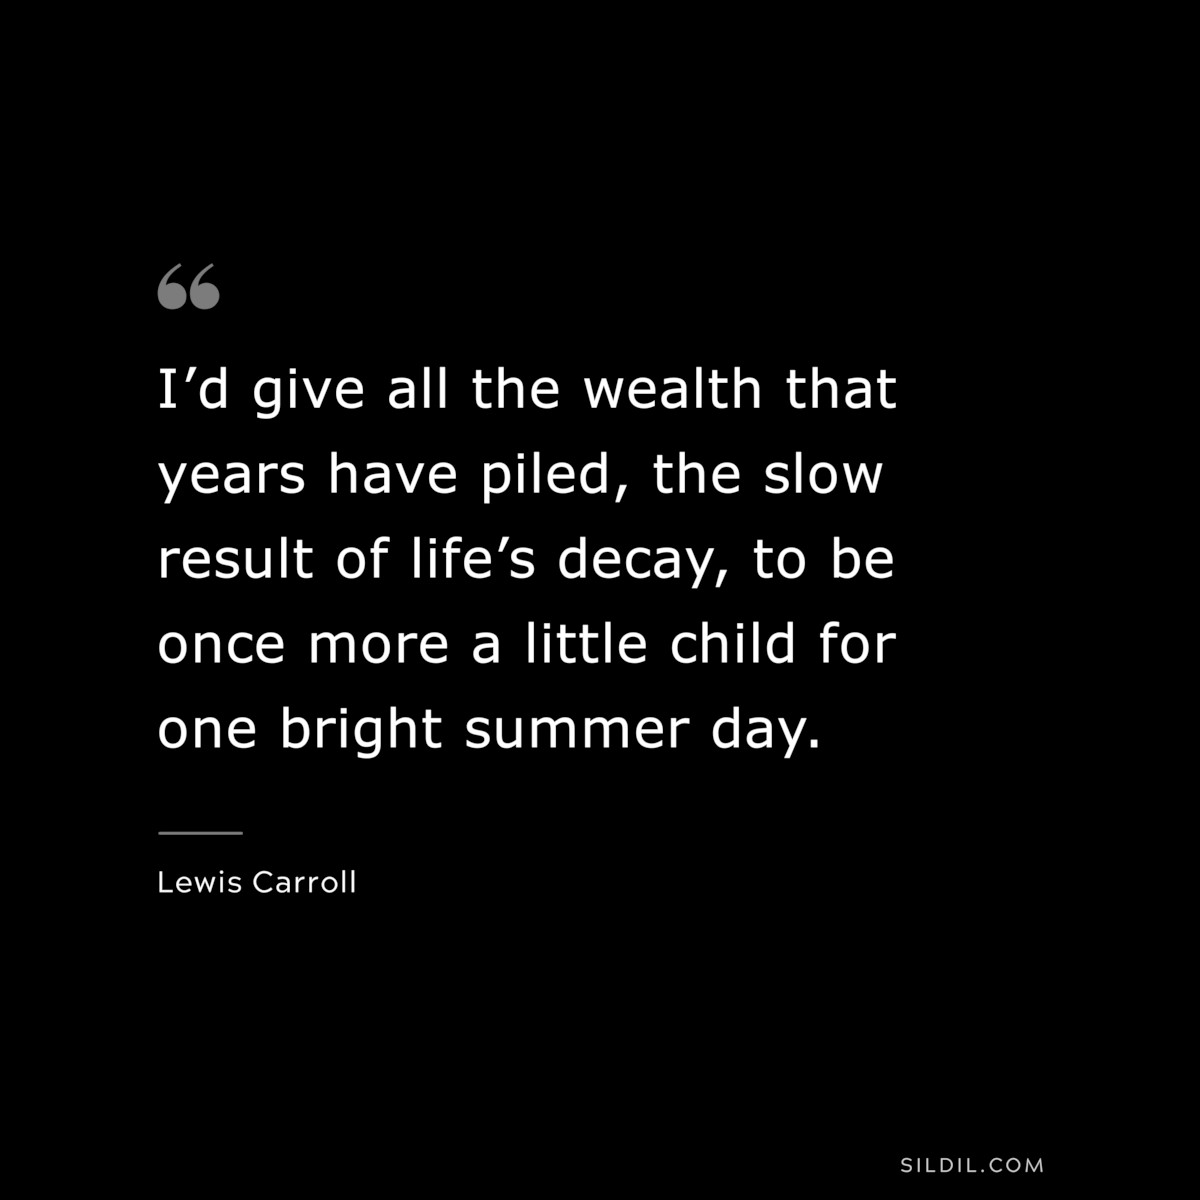 I’d give all the wealth that years have piled, the slow result of life’s decay, to be once more a little child for one bright summer day.